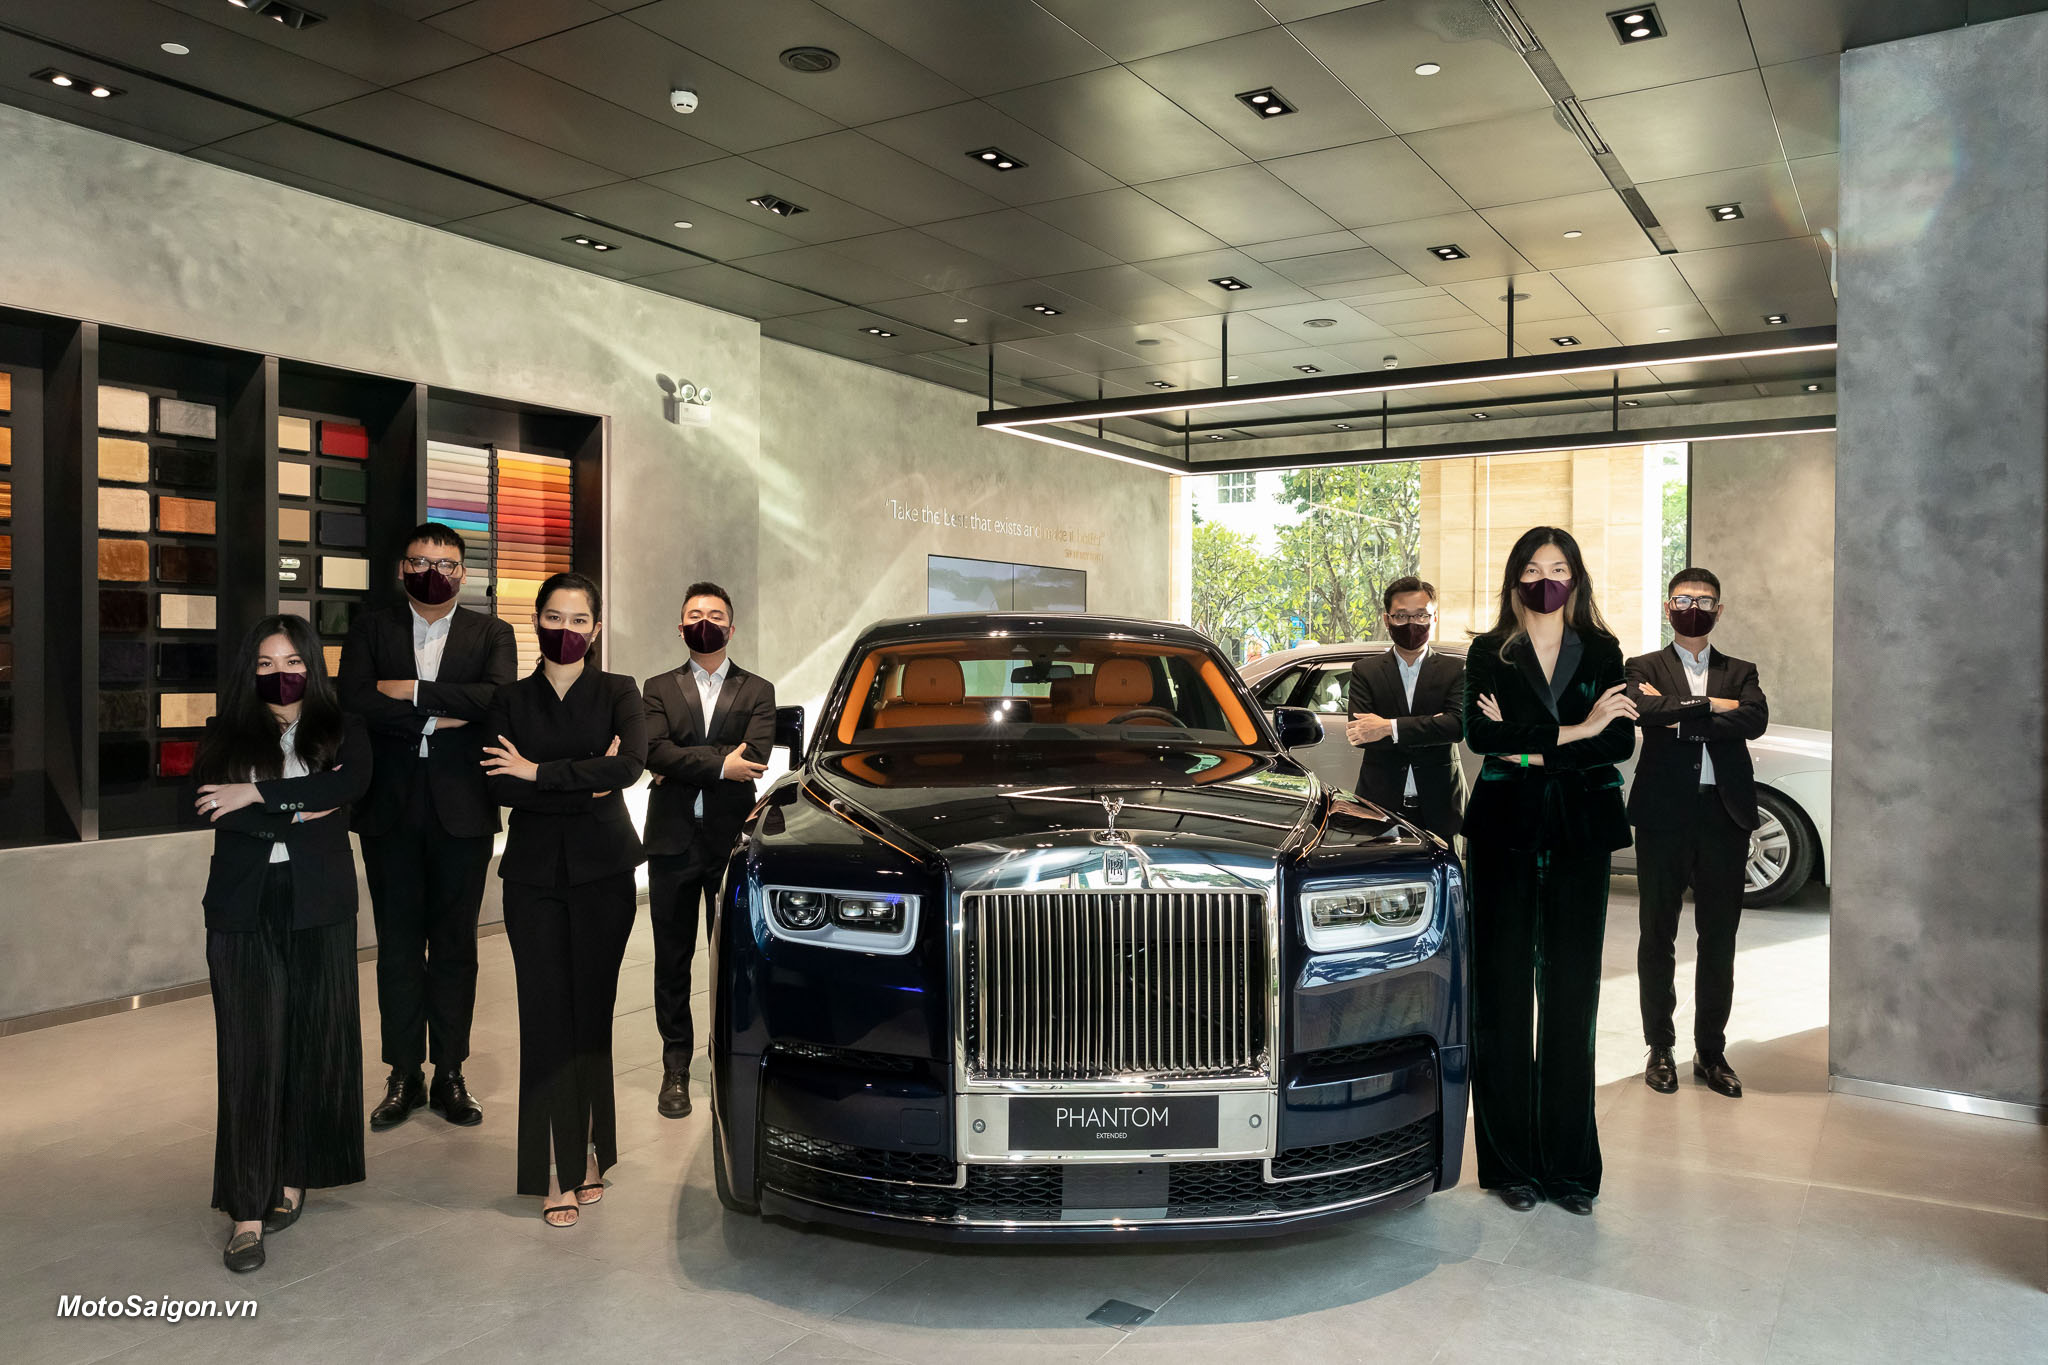 RollsRoyce Motor Cars opens first showroom in Ho Chi Minh City  SS Group   SS Group